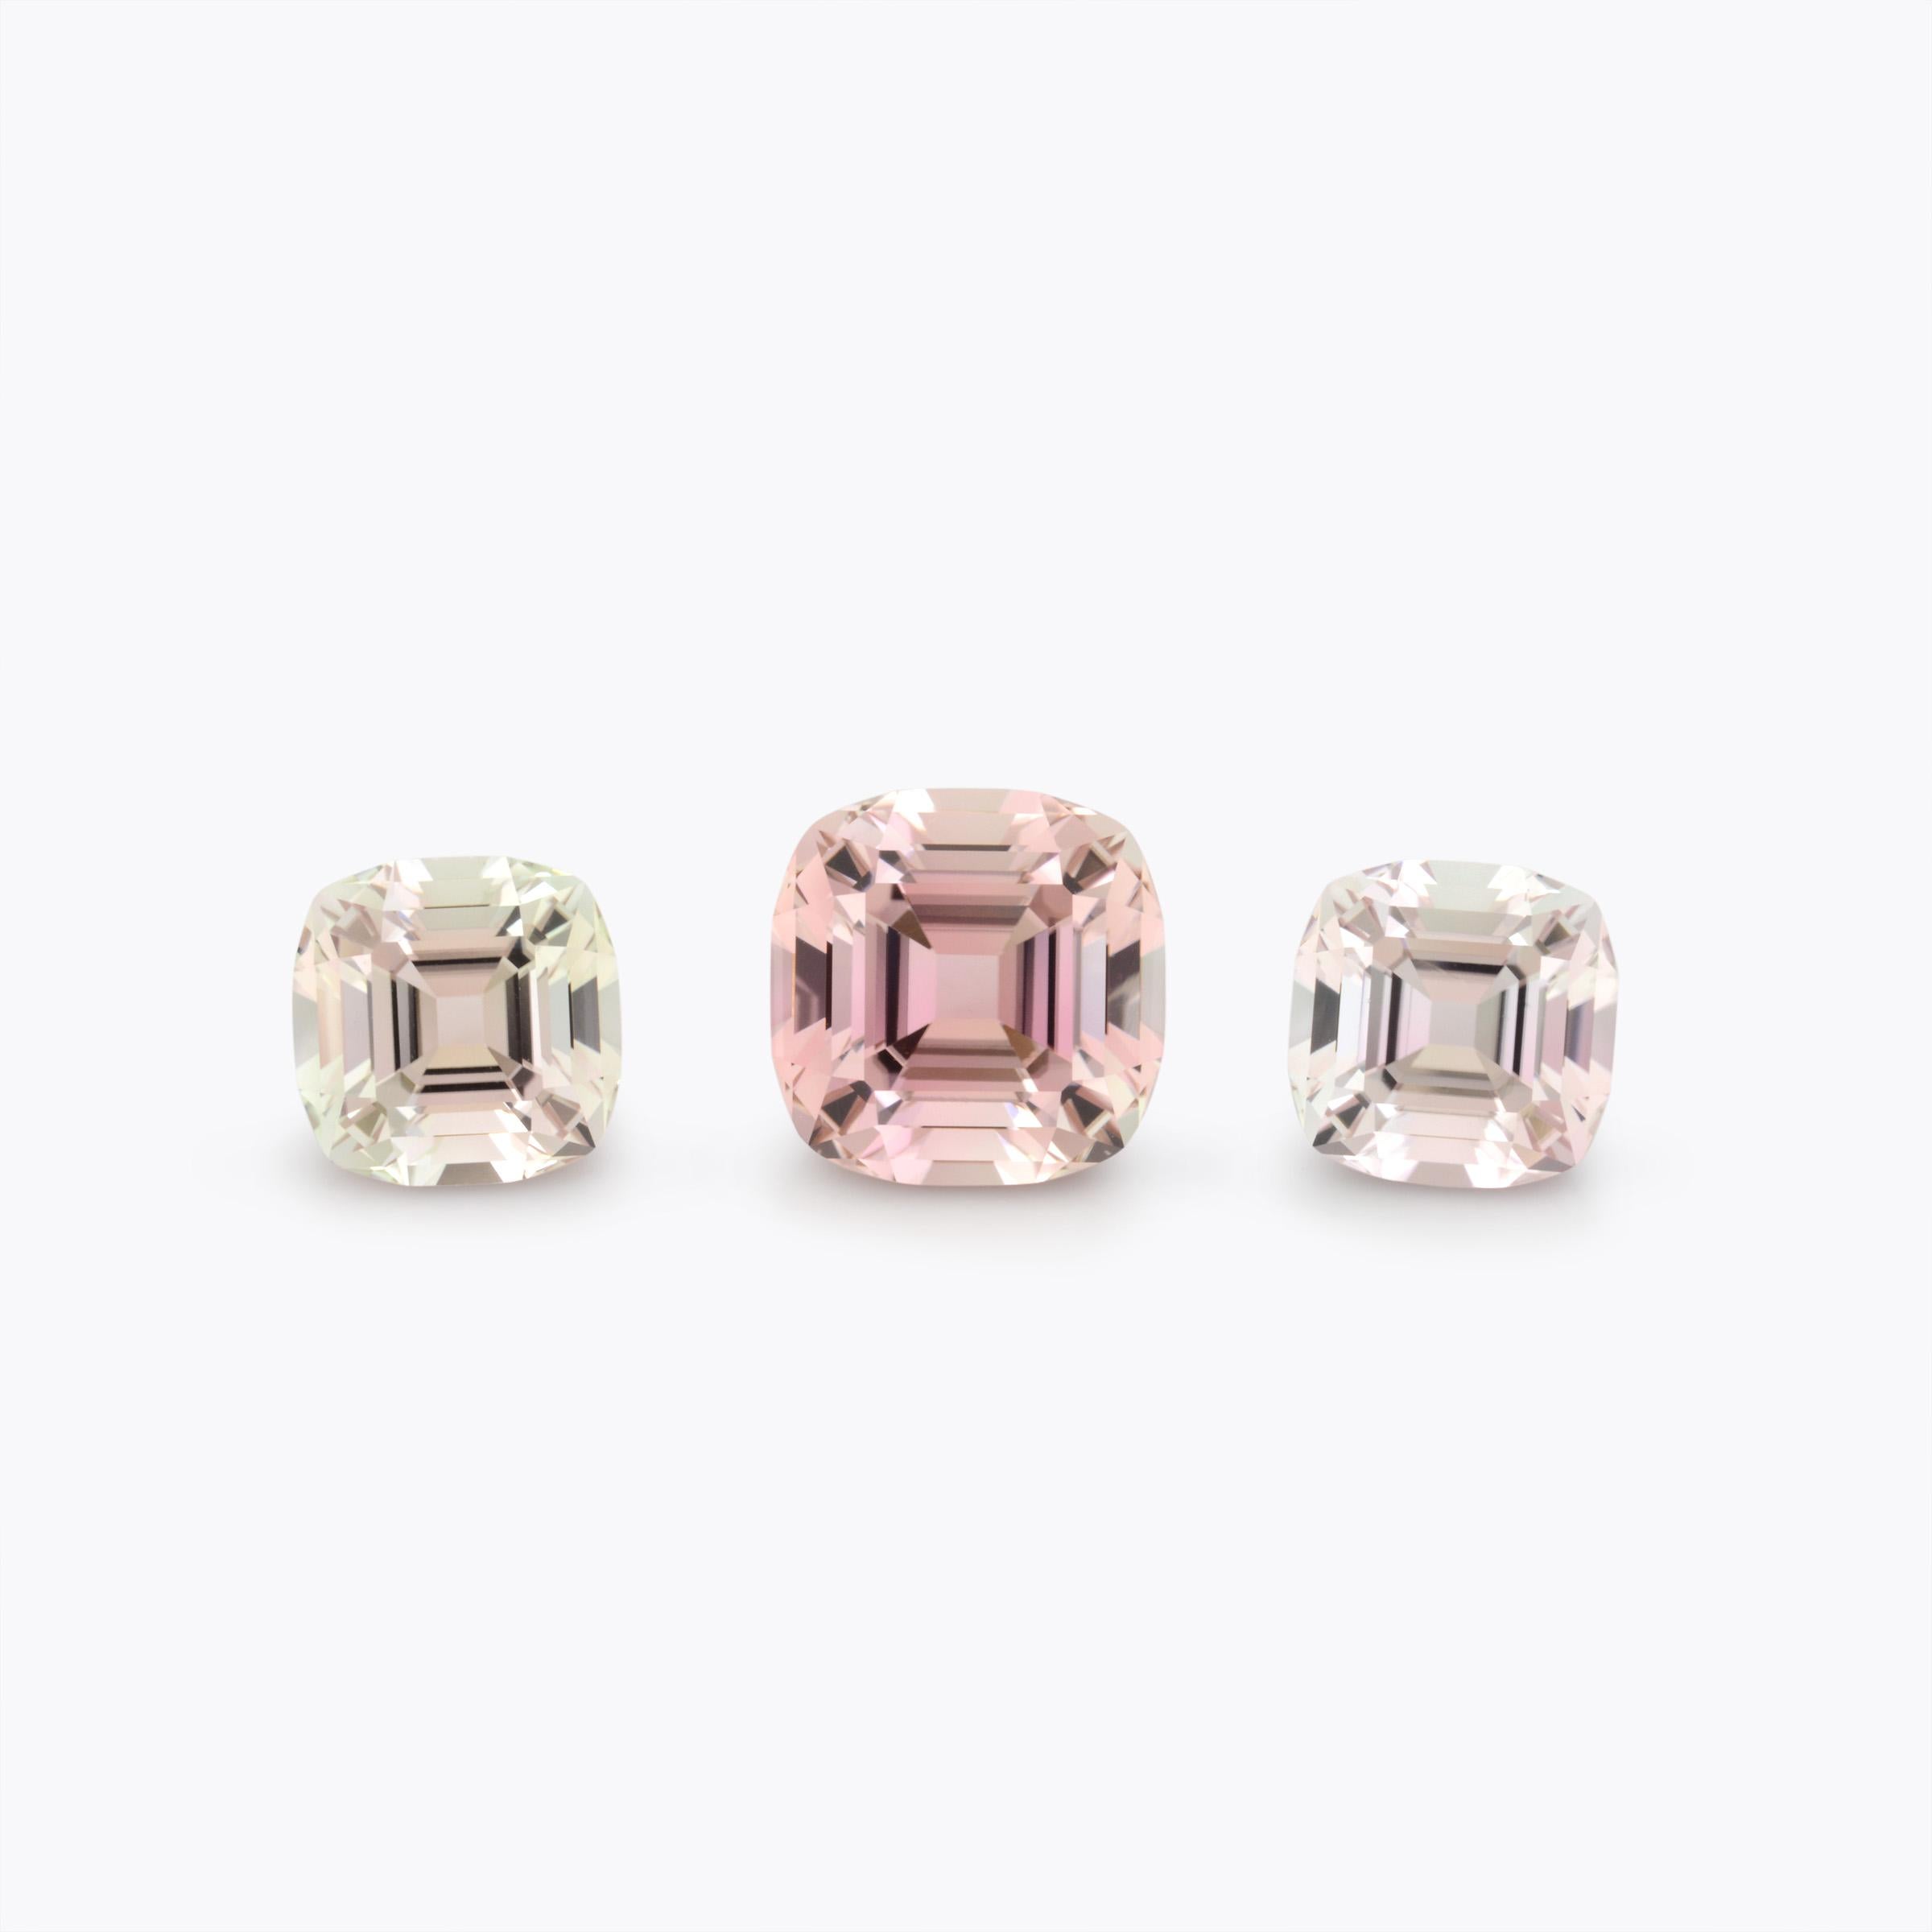 Exclusive 12.09 carat Bicolor Tourmaline gem set, offered unmounted to an avid gemstone collector.
This is a unique set for a custom ring and matching earrings.
Returns are accepted and paid by us within 7 days of delivery.
We offer supreme custom